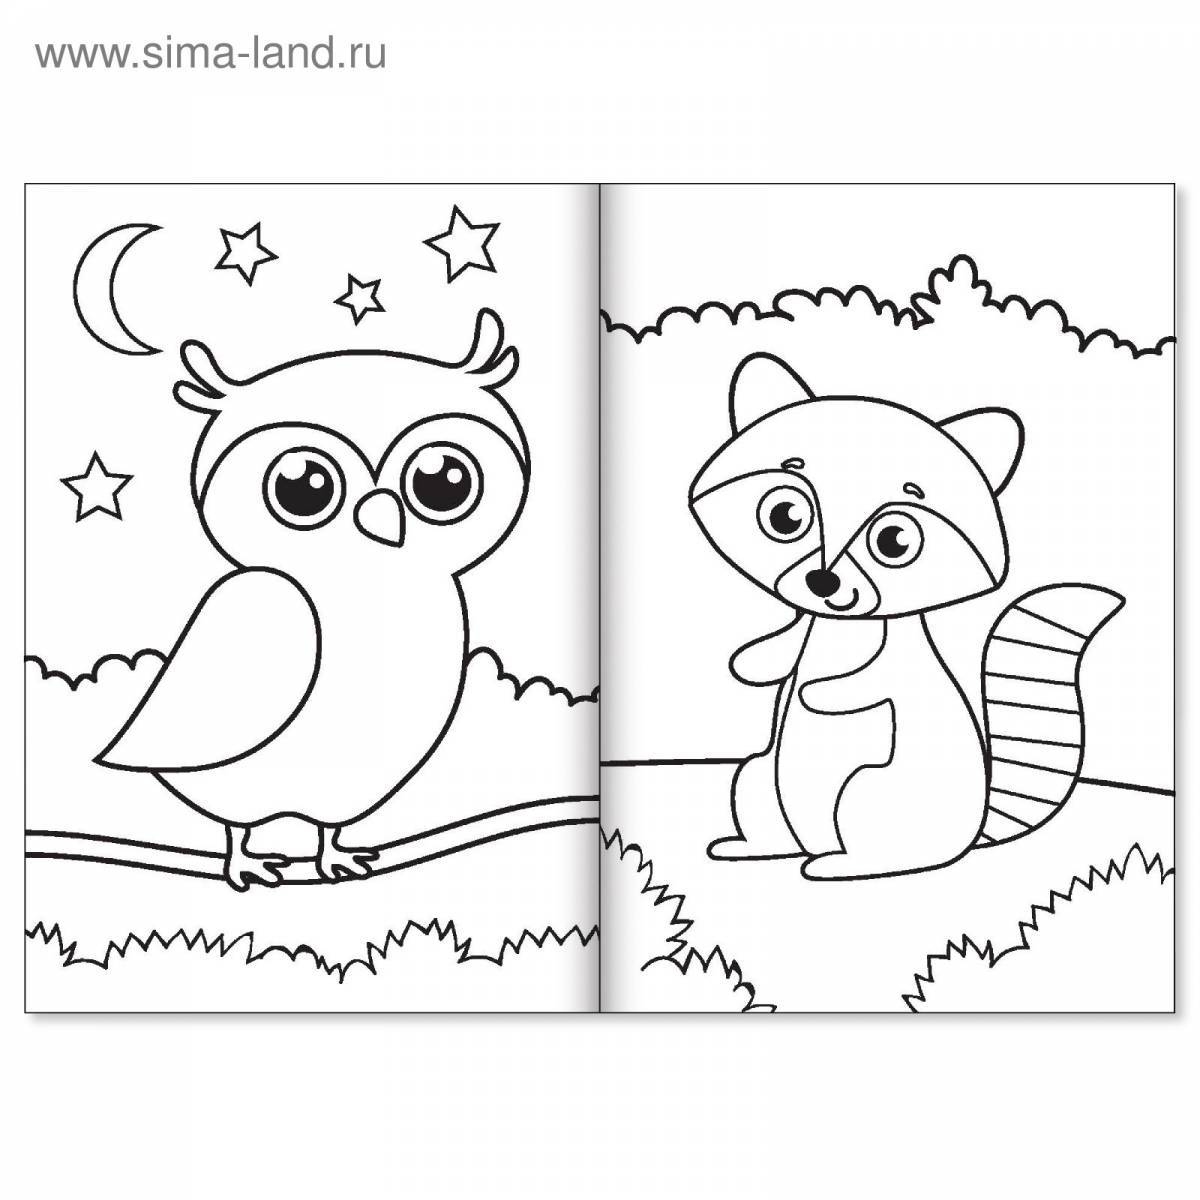 Printable drawings for children #2